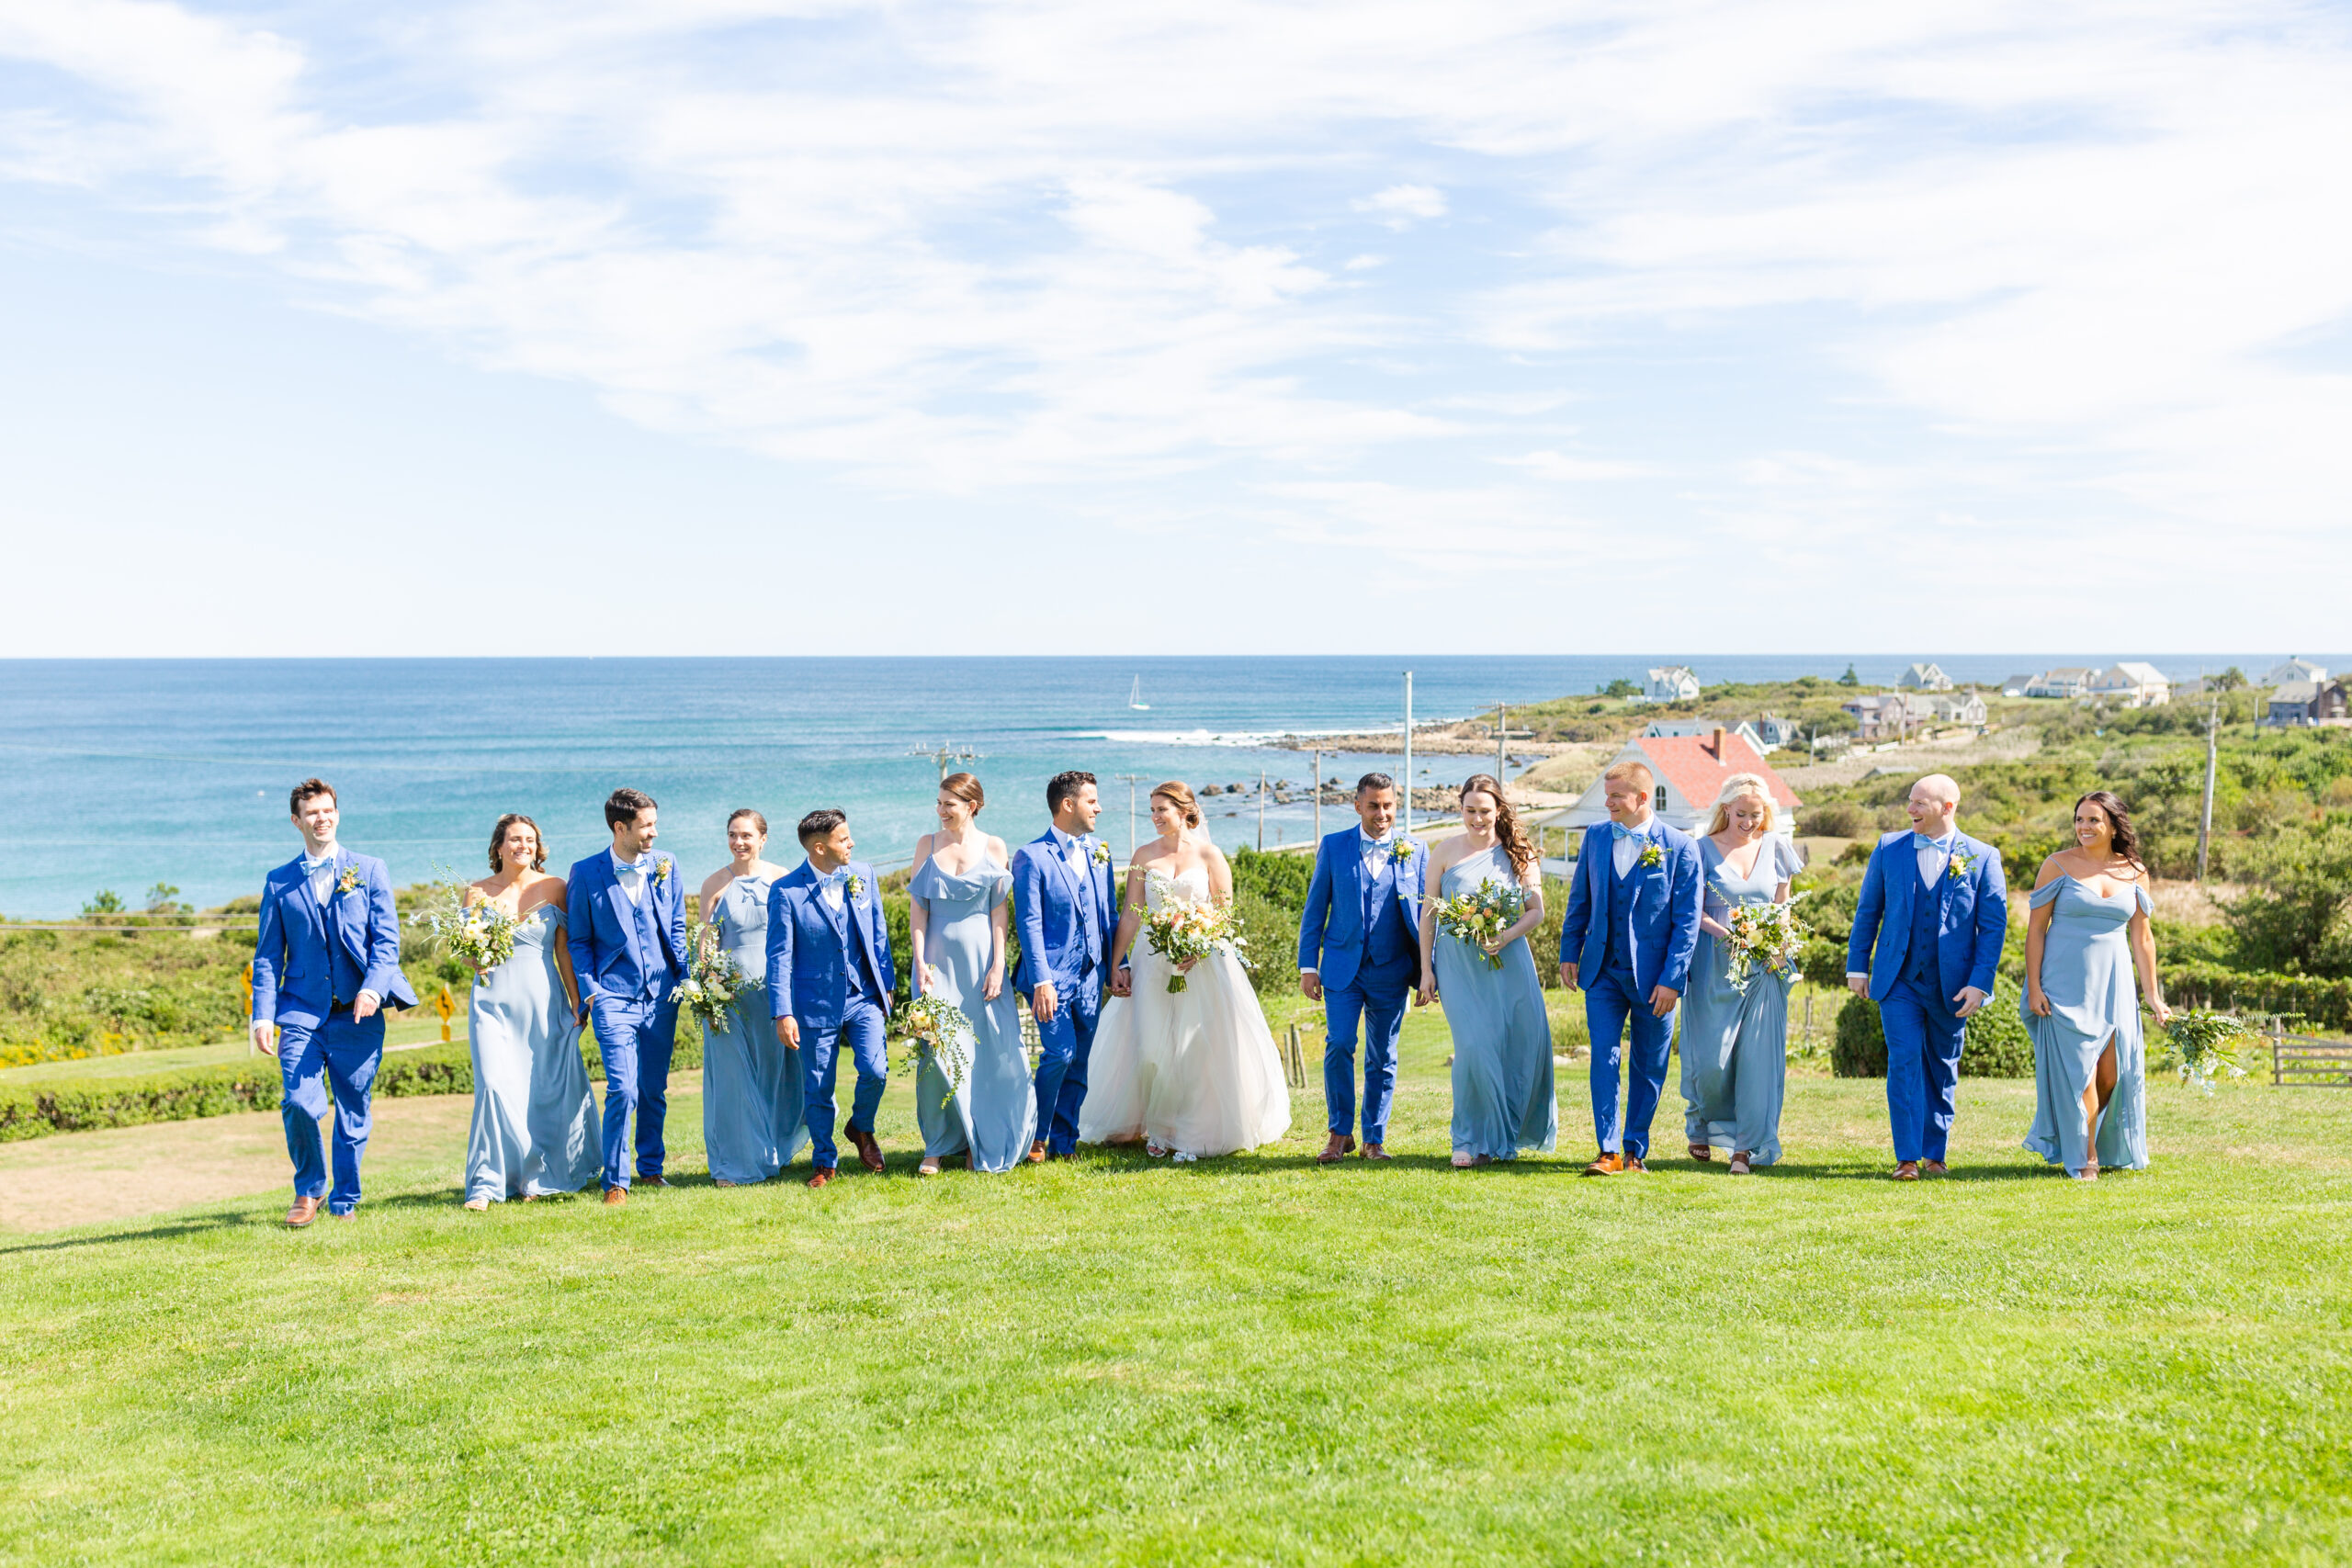 Bridal party walks on lawn of Spring House during wedding with ocean view in the distance.